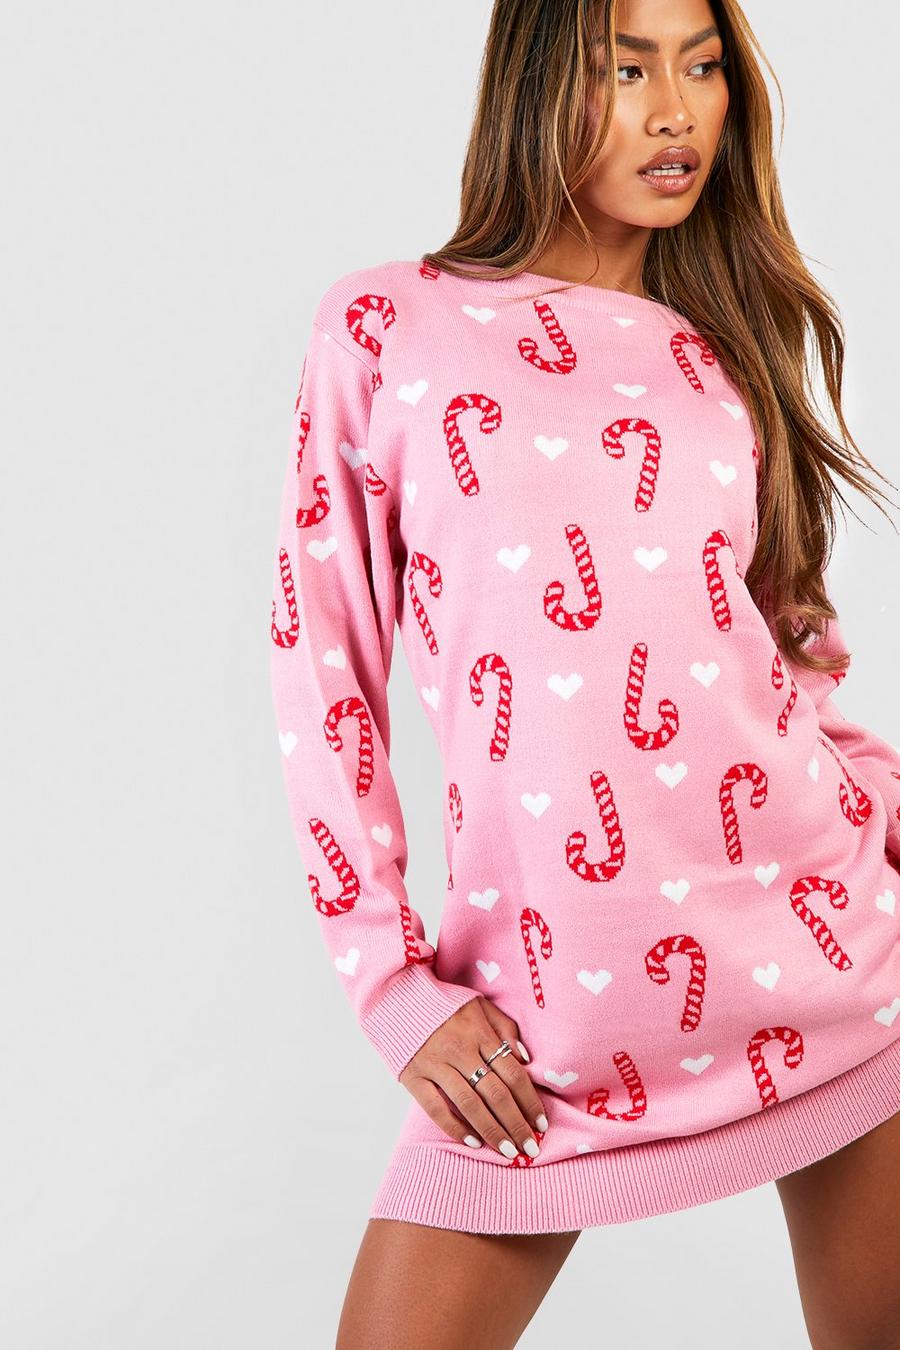 Baby pink All Over Candy Cane Christmas Jumper Dress